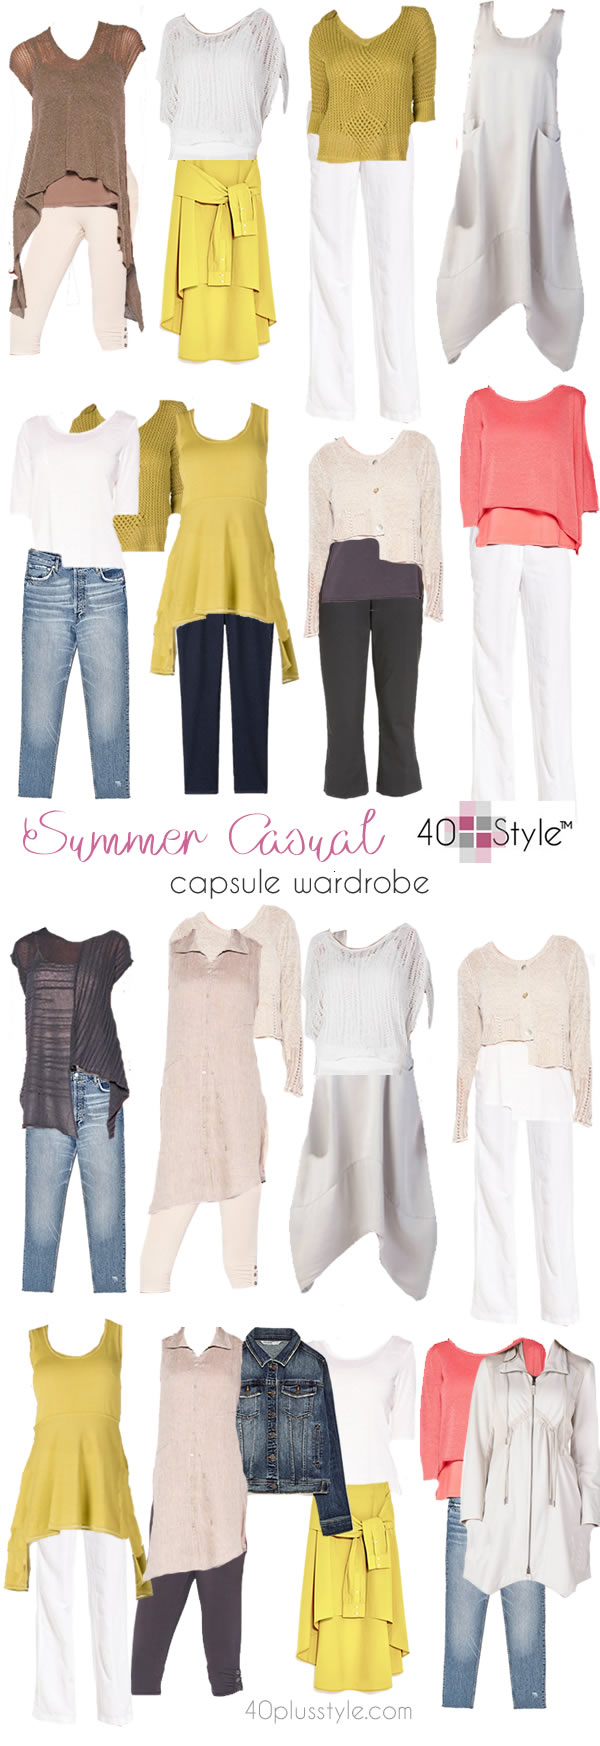 Lots of outfit options in this casual capsule wardrobe for summer | 40plusstyle.com